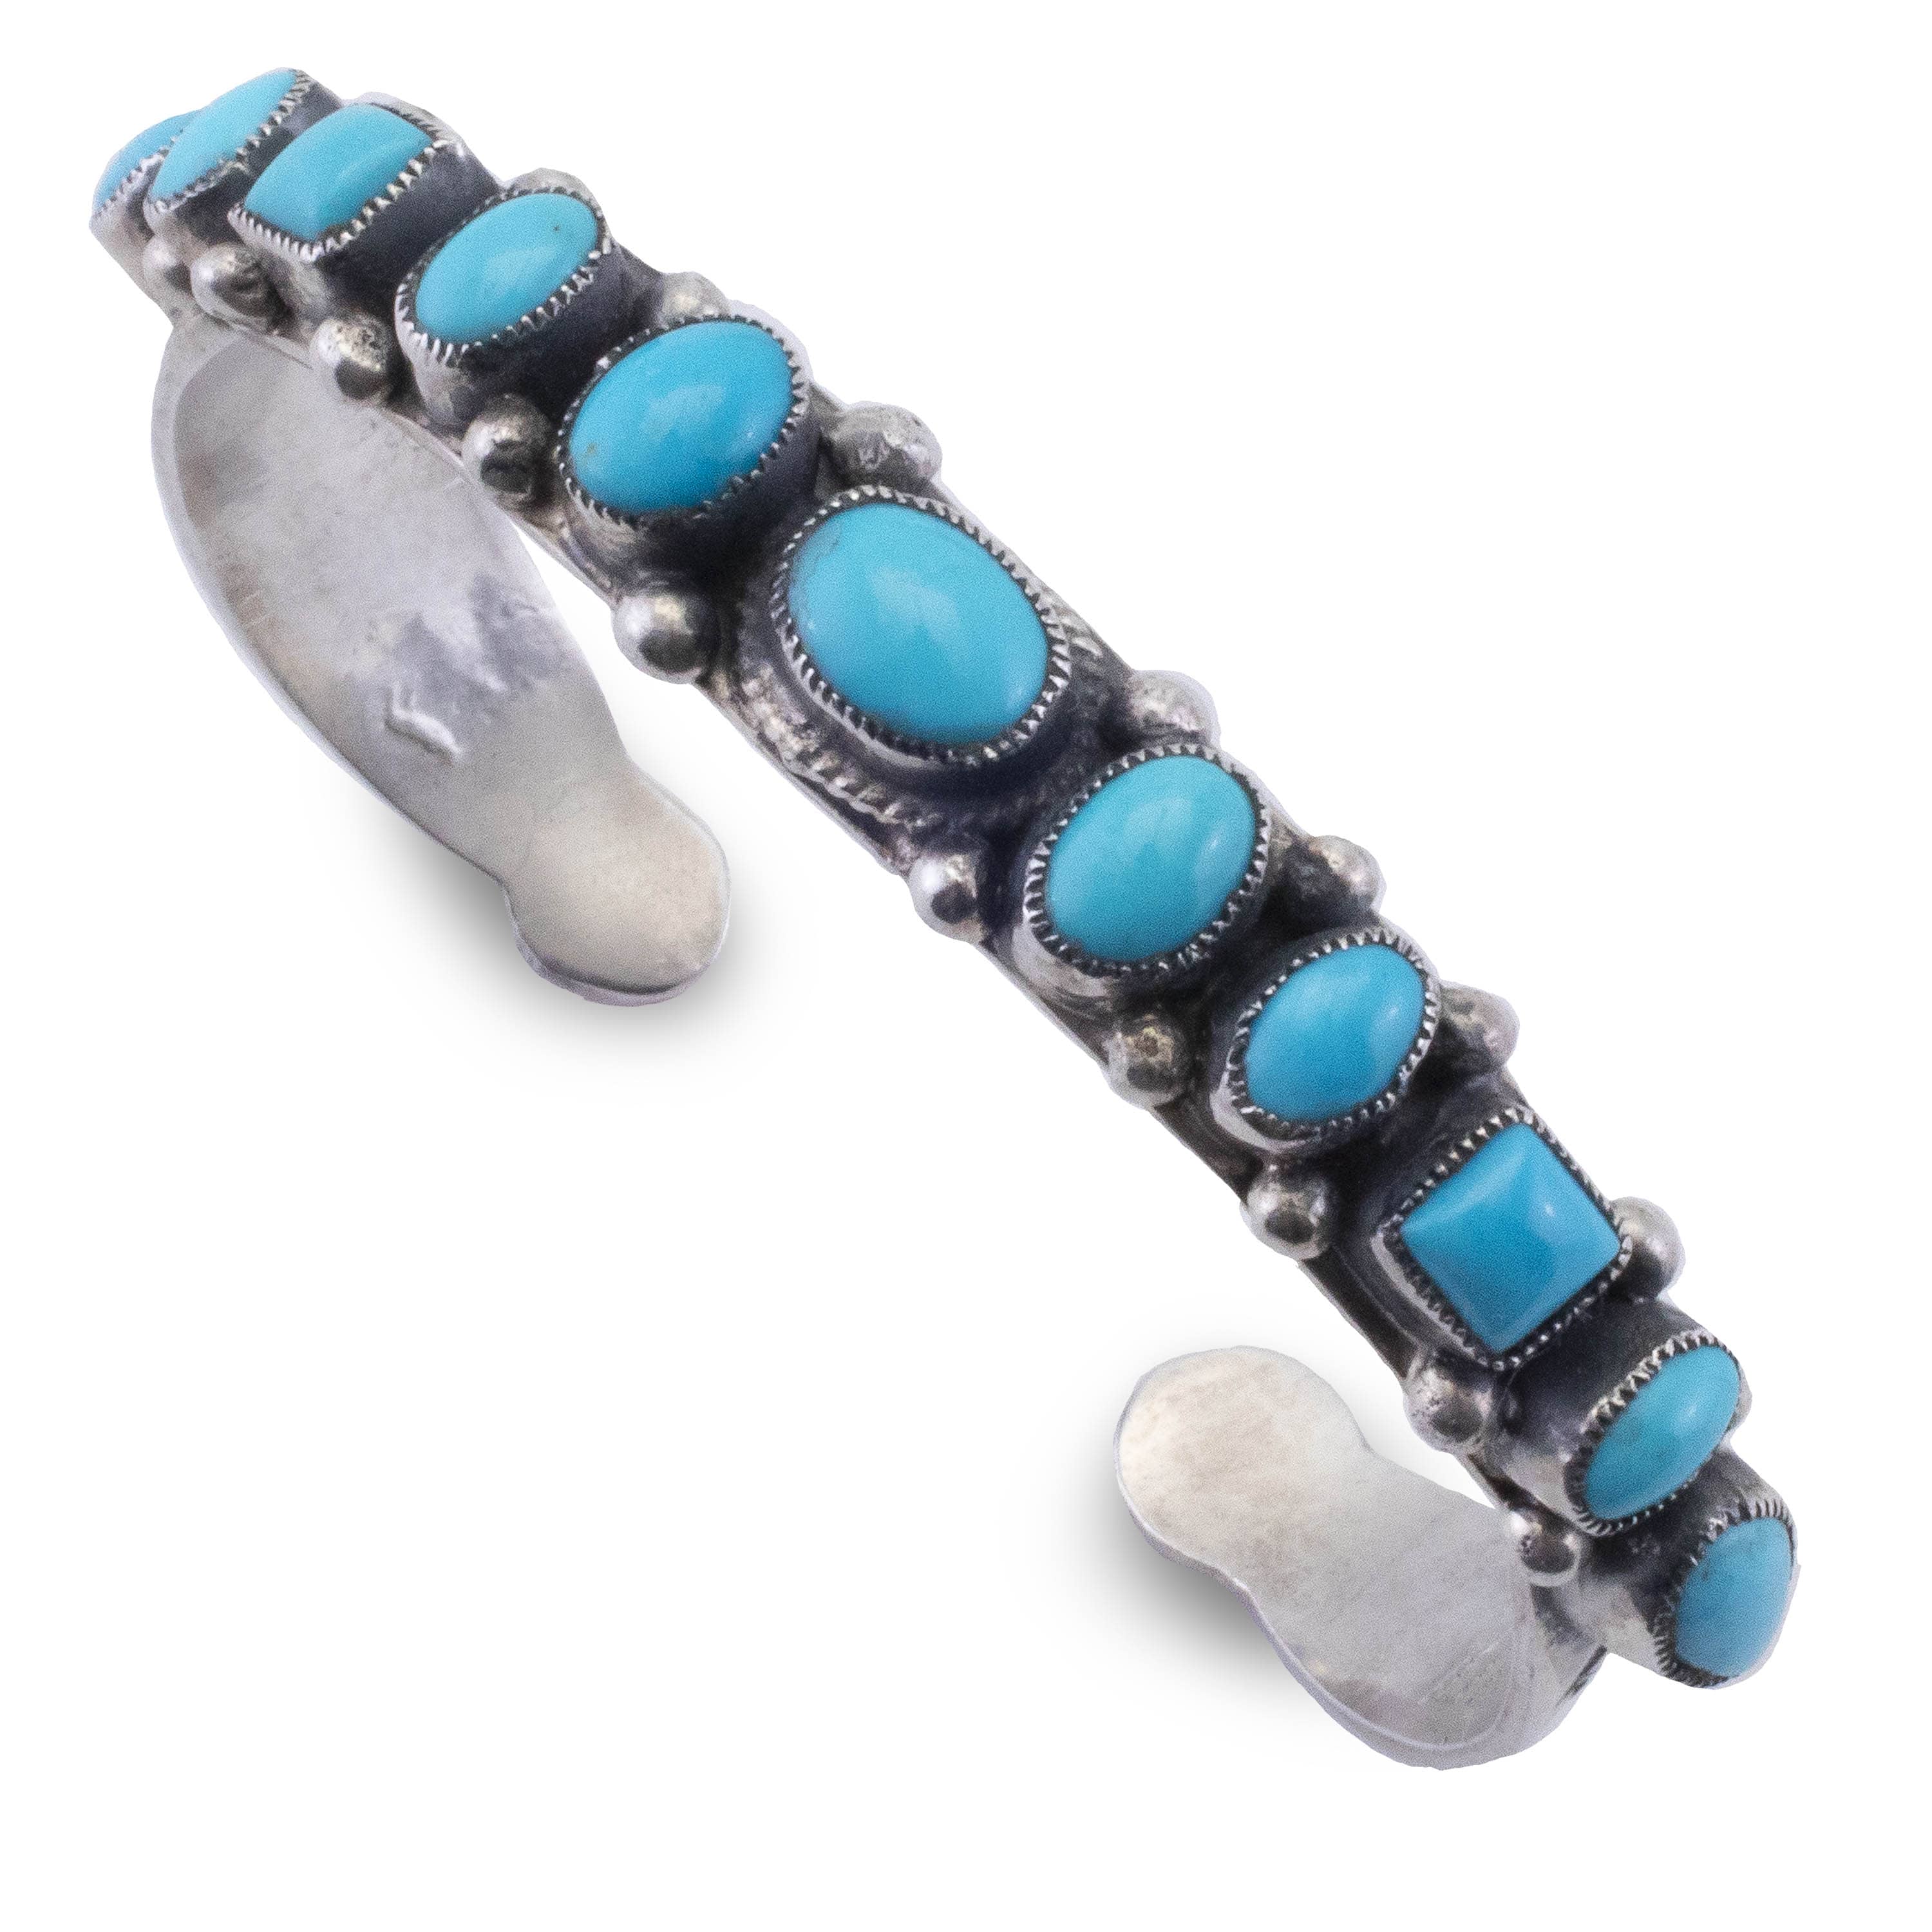 Kalifano Native American Jewelry Leo Feeney Sleeping Beauty Turquoise with Coral Accents USA Native American Made 925 Sterling Silver Cuff NAB1800.026